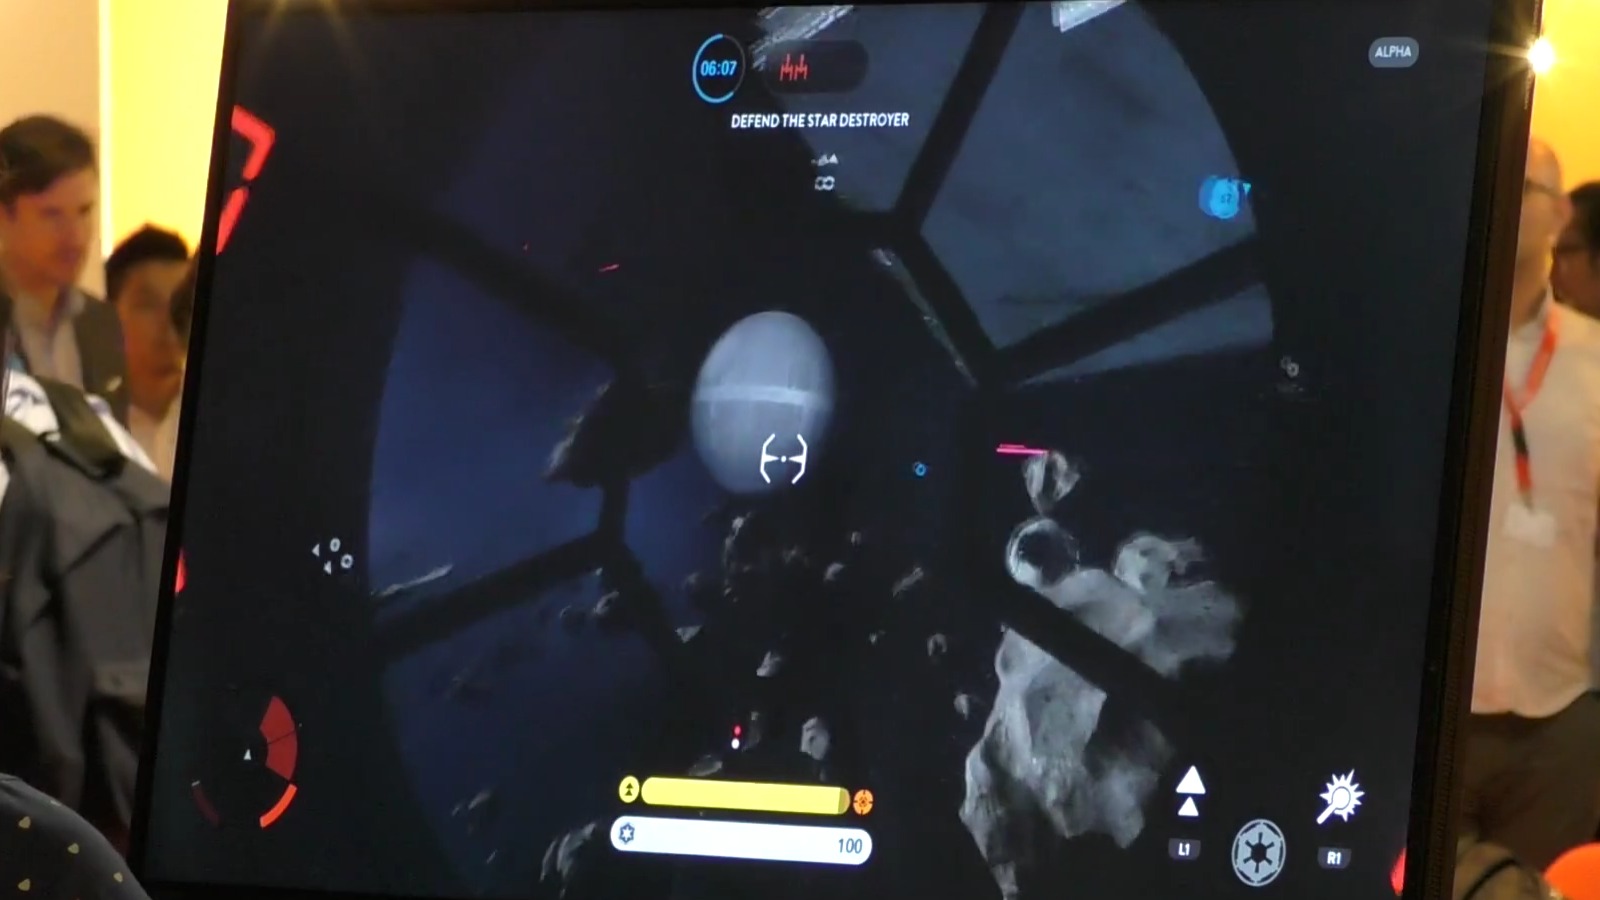 Footage of the Death Star DLC.